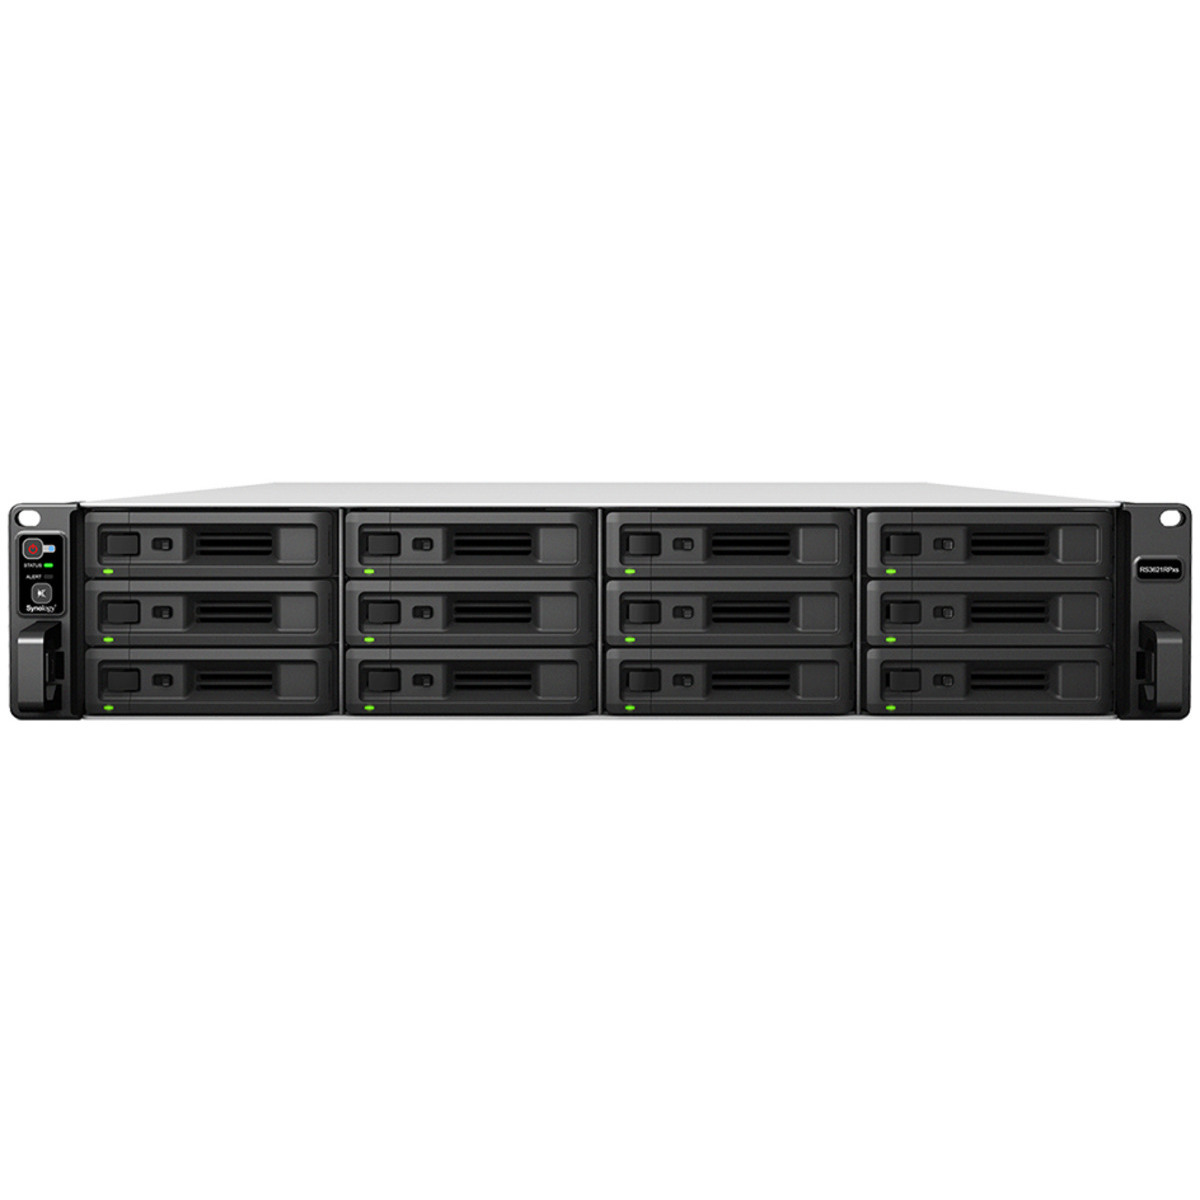 Synology RackStation RS3621RPxs 112tb 12-Bay RackMount Large Business / Enterprise NAS - Network Attached Storage Device 7x16tb Synology HAT5300 Series HAT5300-16T 3.5 7200rpm SATA 6Gb/s HDD ENTERPRISE Class Drives Installed - Burn-In Tested RackStation RS3621RPxs